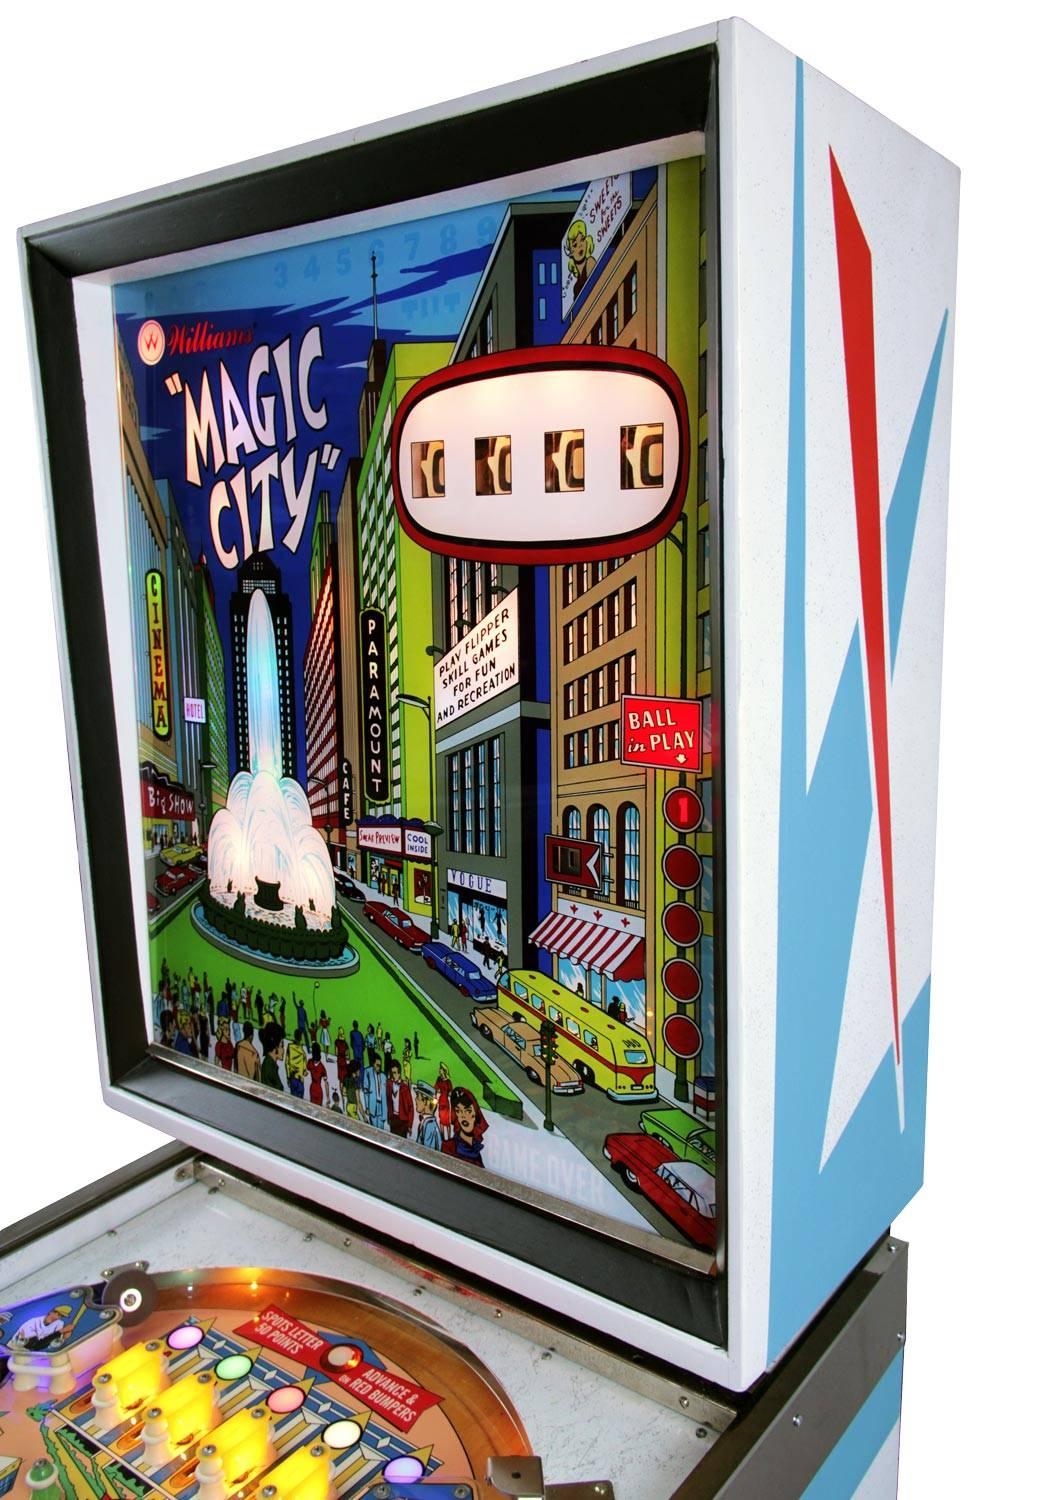 Name: Magic City
Make: Williams
DOB: Jan 1967
Type: Replay
Designer: Norm Clark
Artwork: George Molentin
This game is from our own personal collection. It is a ground up restoration and nothing has been over-looked. We even made a new glass